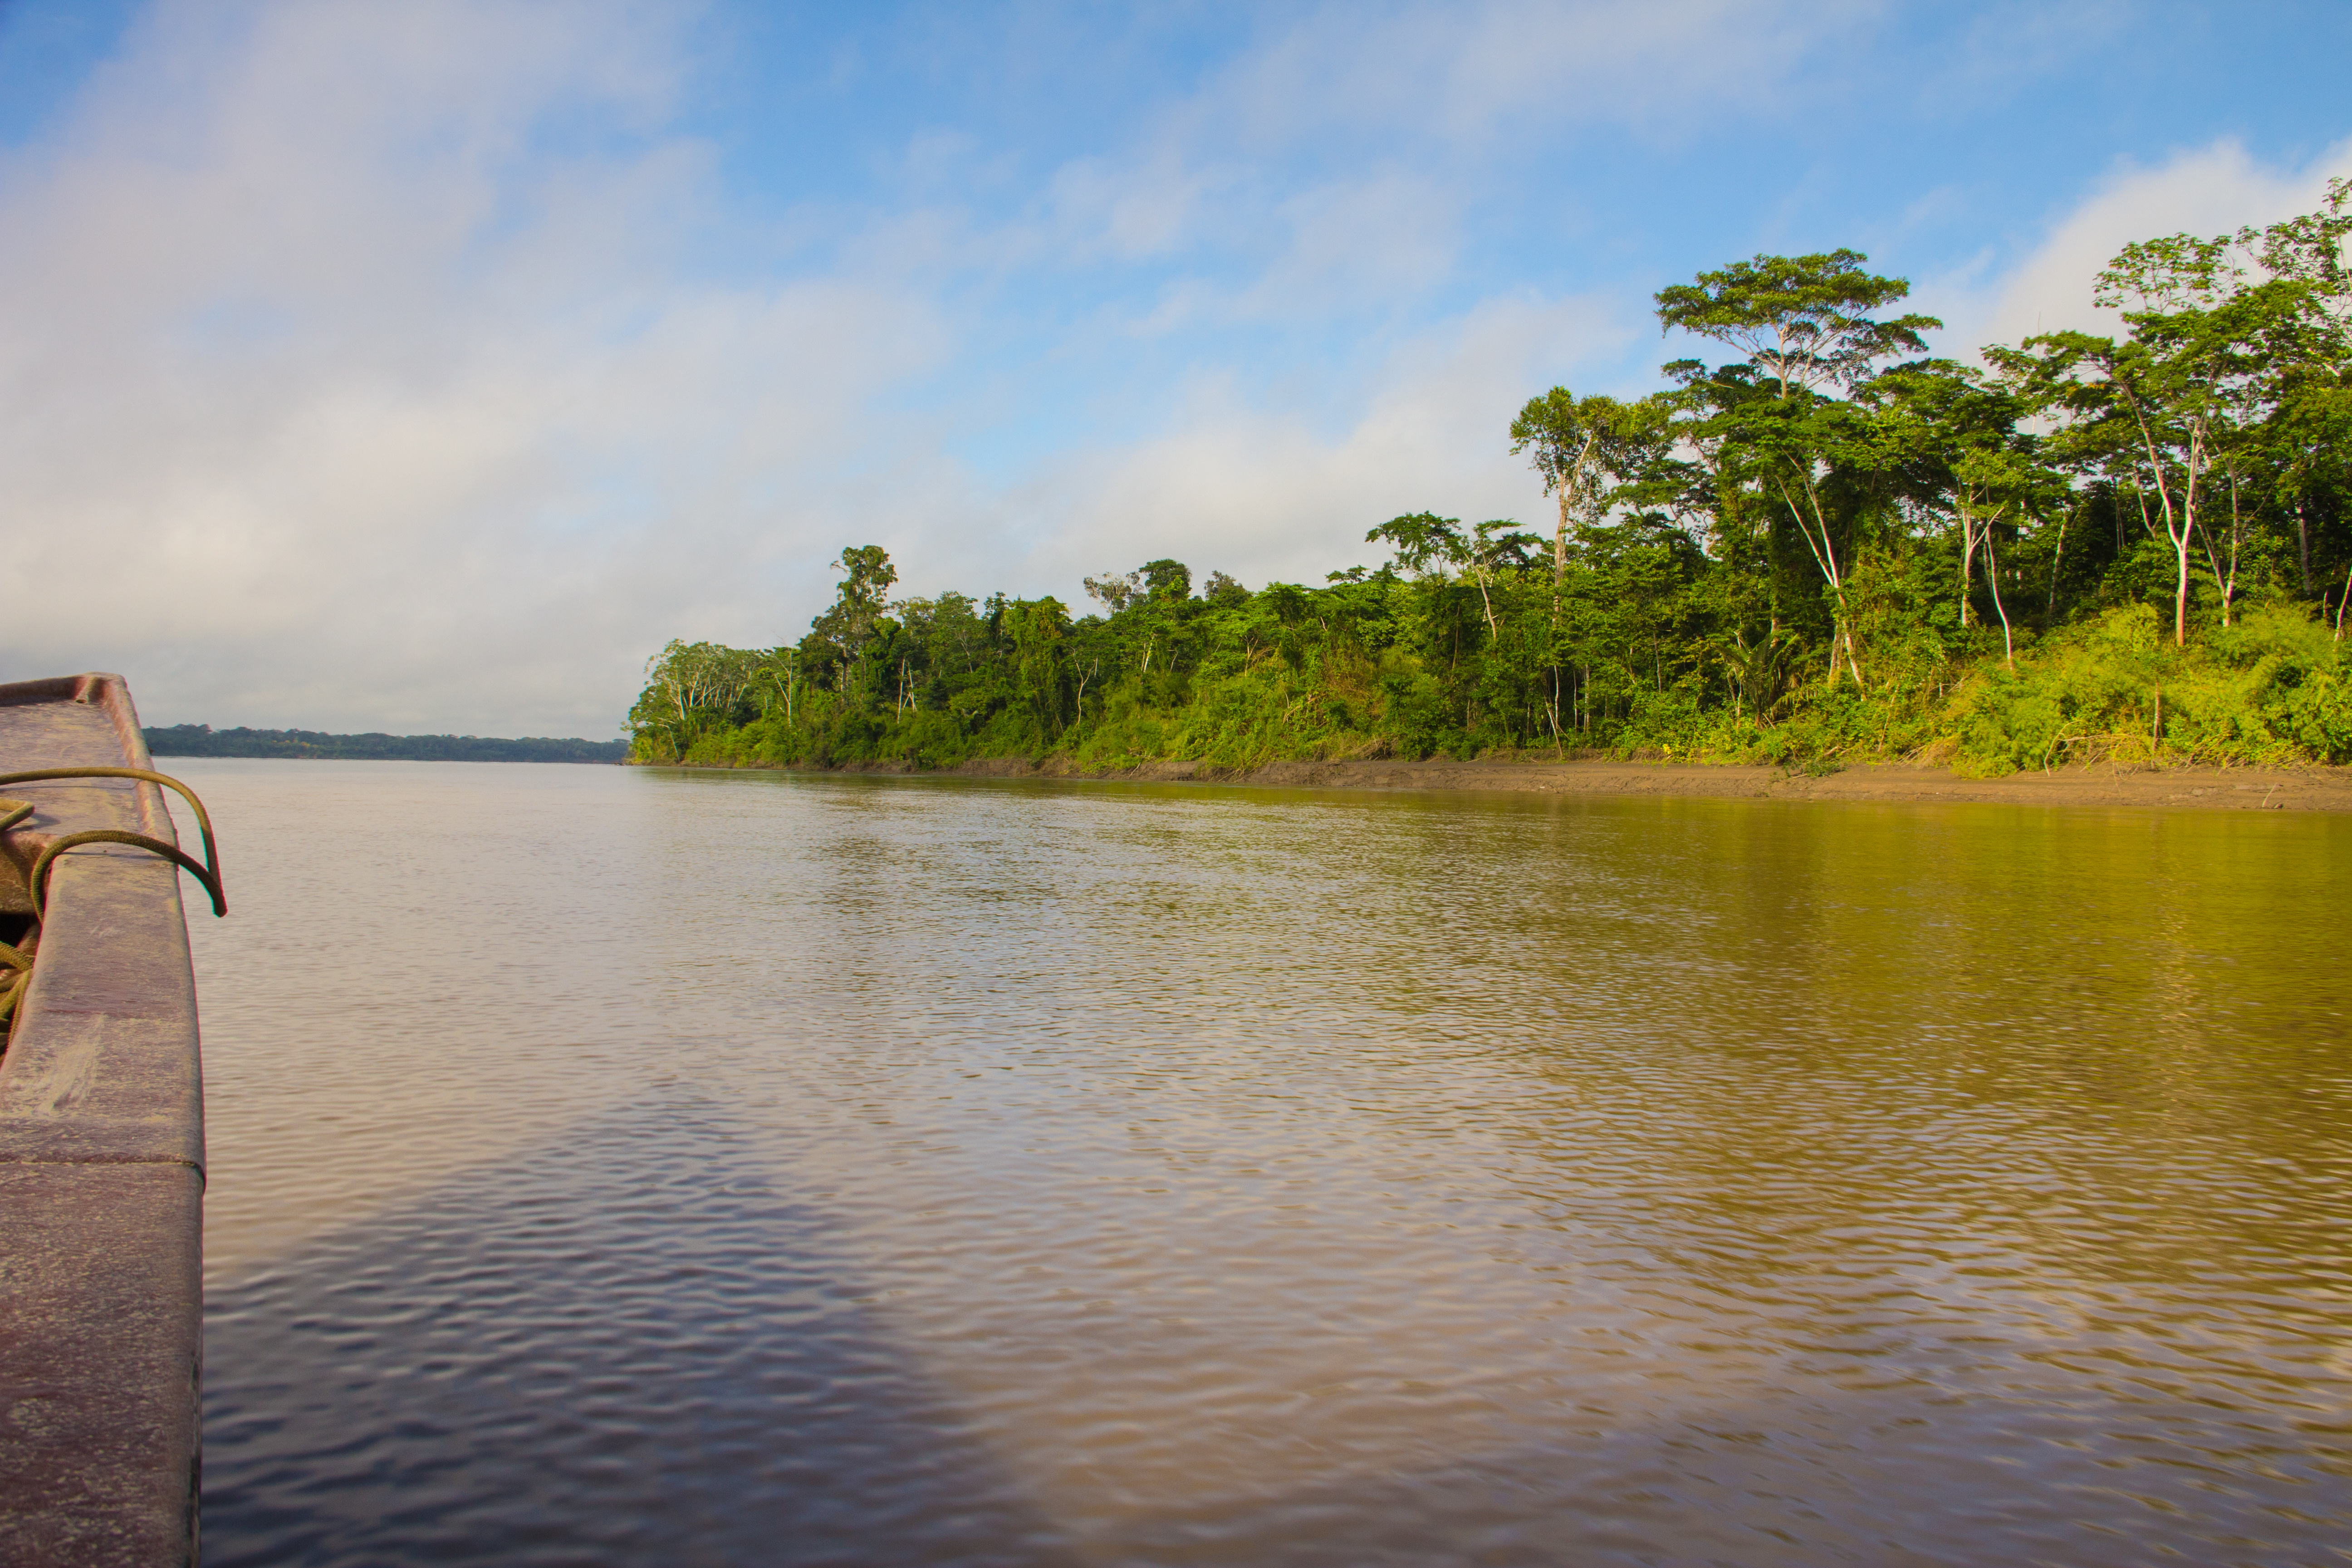 Making Our Way Down the Madre de Dios River by Boat 5 Unforgettable Eco-adventures 